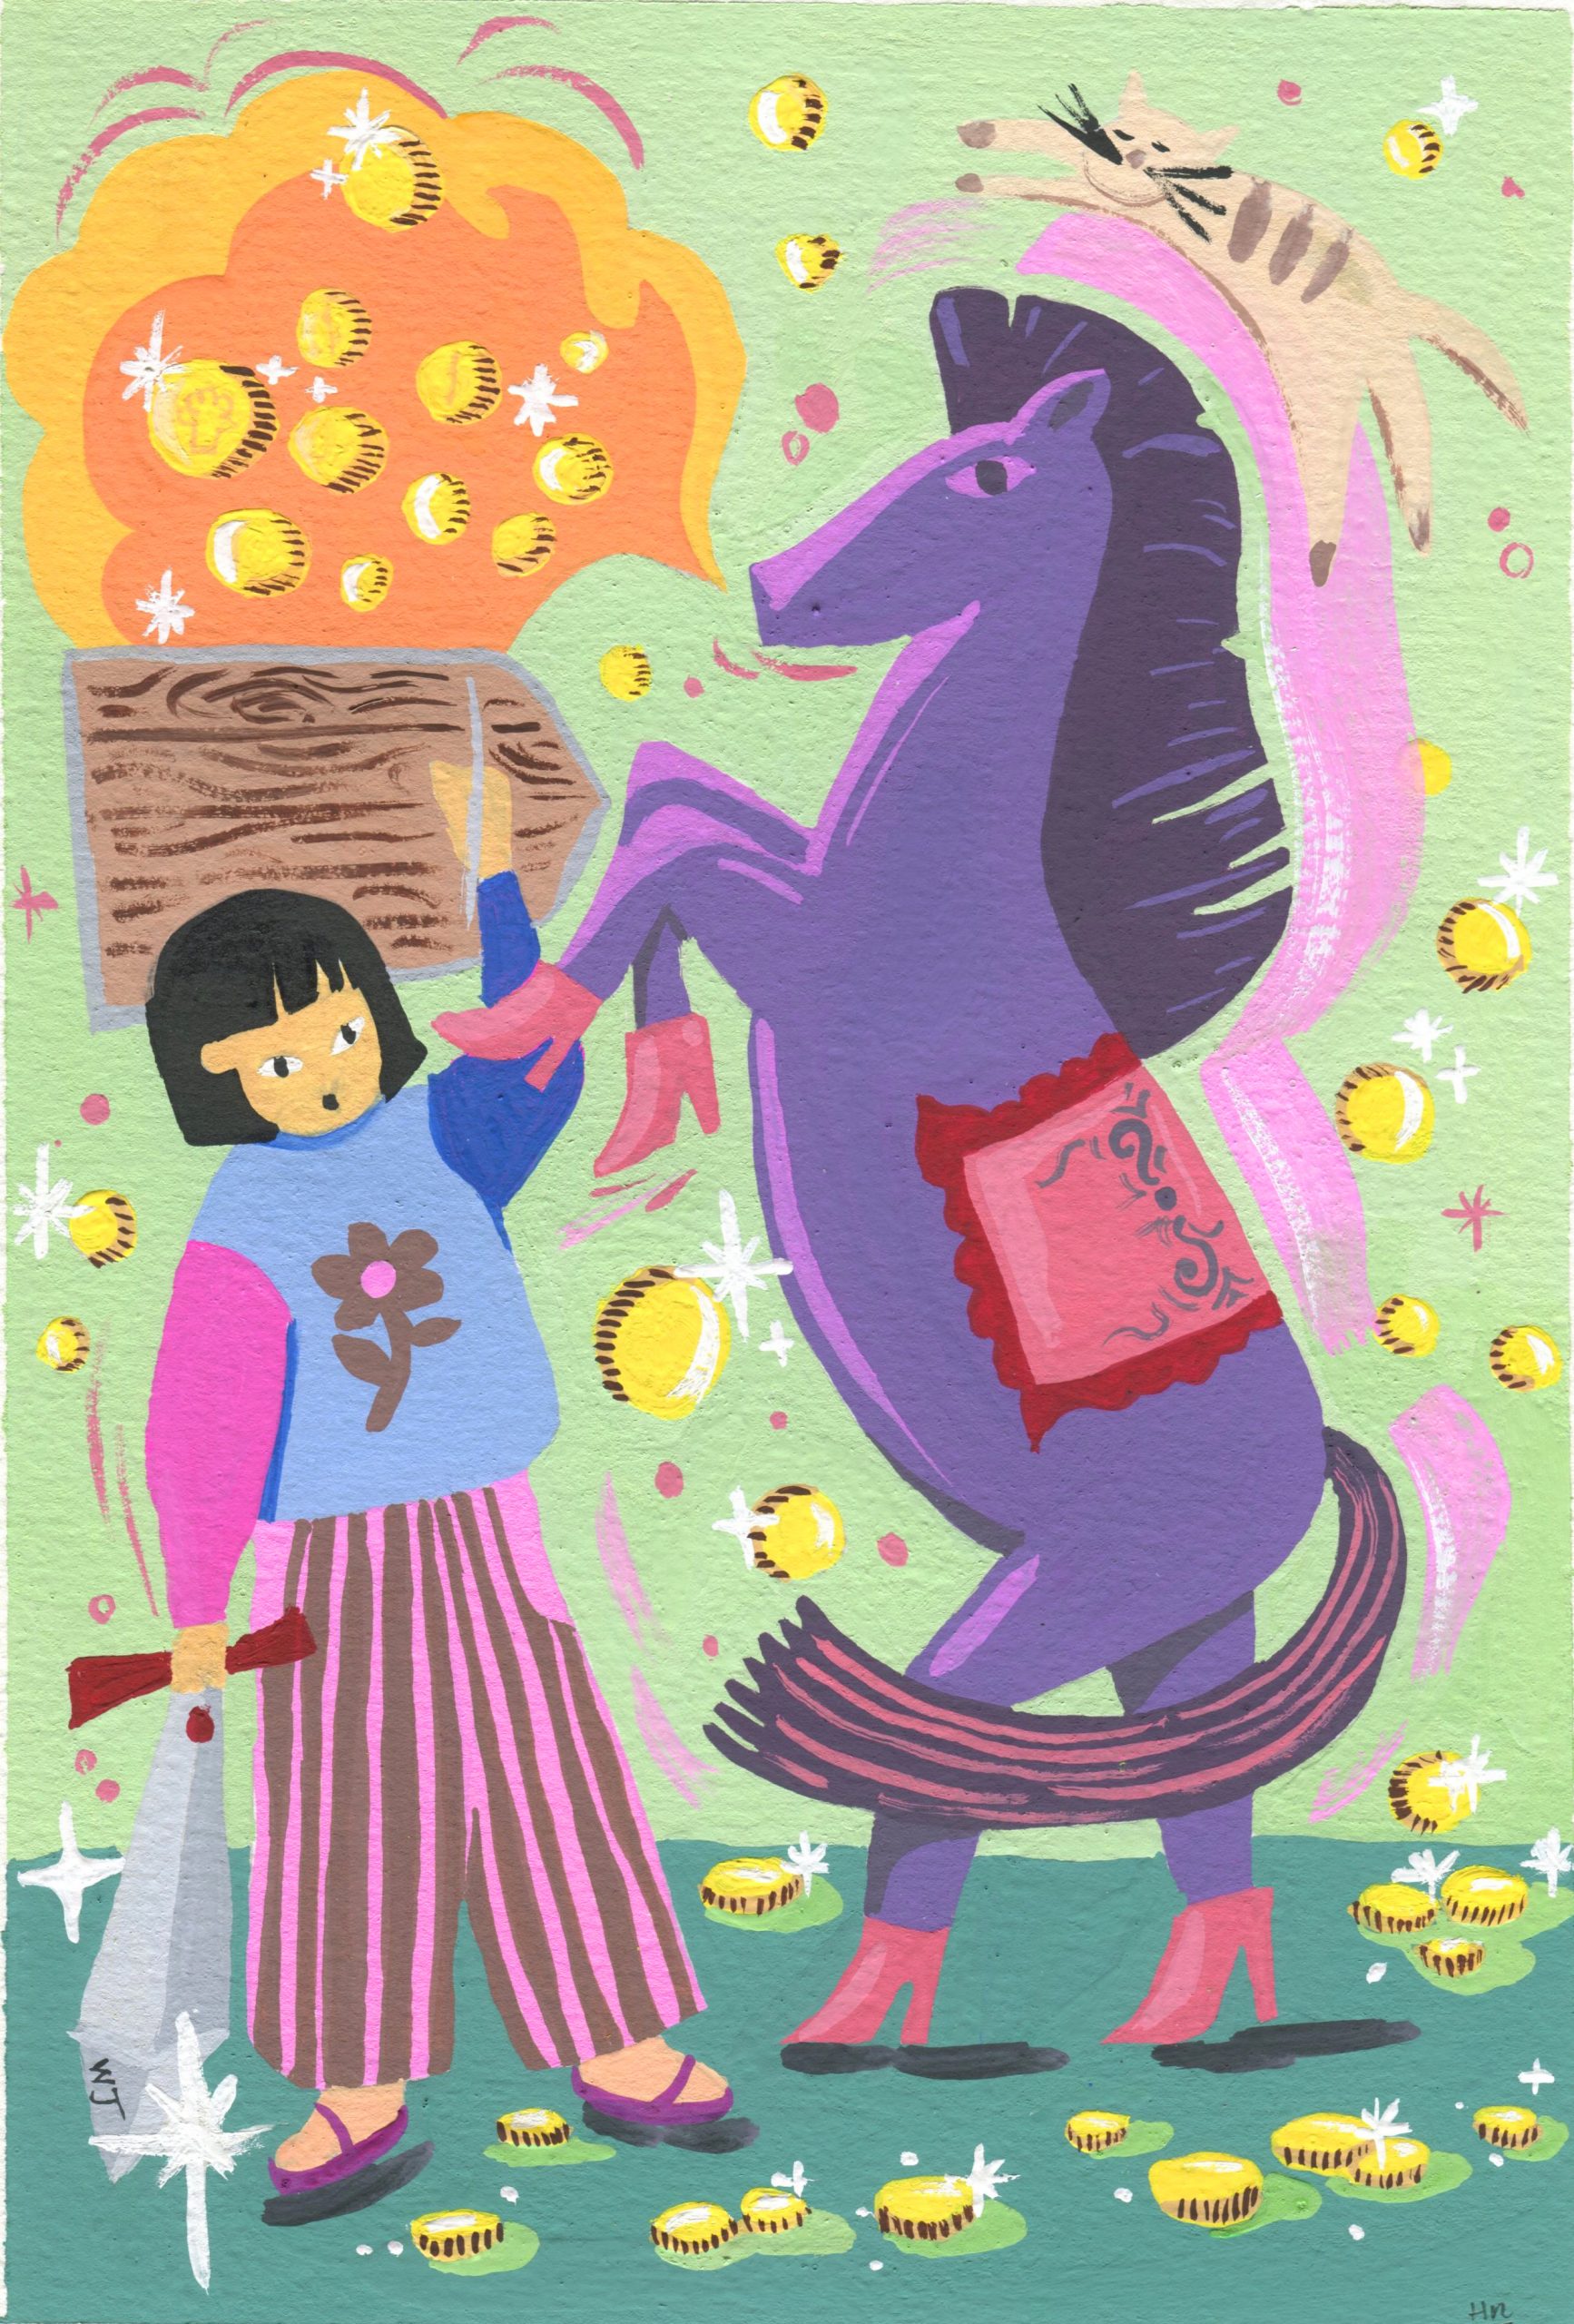 A painting with bold colours and shapes, of a young girl on the left-hand side with a black bob and in a pink and blue jumper with a flower on the front, stripey pink pants and slides with pink socks. In one hand she holds a glittering sword. She raises her right hand where it crosses over with the legs of the large purple horse rearing up on the right-hand side of the painting. The horse is standing on its hind legs, is wearing pink high-heeled boots on all four feet, and has a long swishing tail. The figures are on an aqua background and turqouise floor, surrounded by sparkling golden coins. The horse has an orange cloudy speech bubble filled with more coins. A cheeky little beige cat rests on top of the horse.